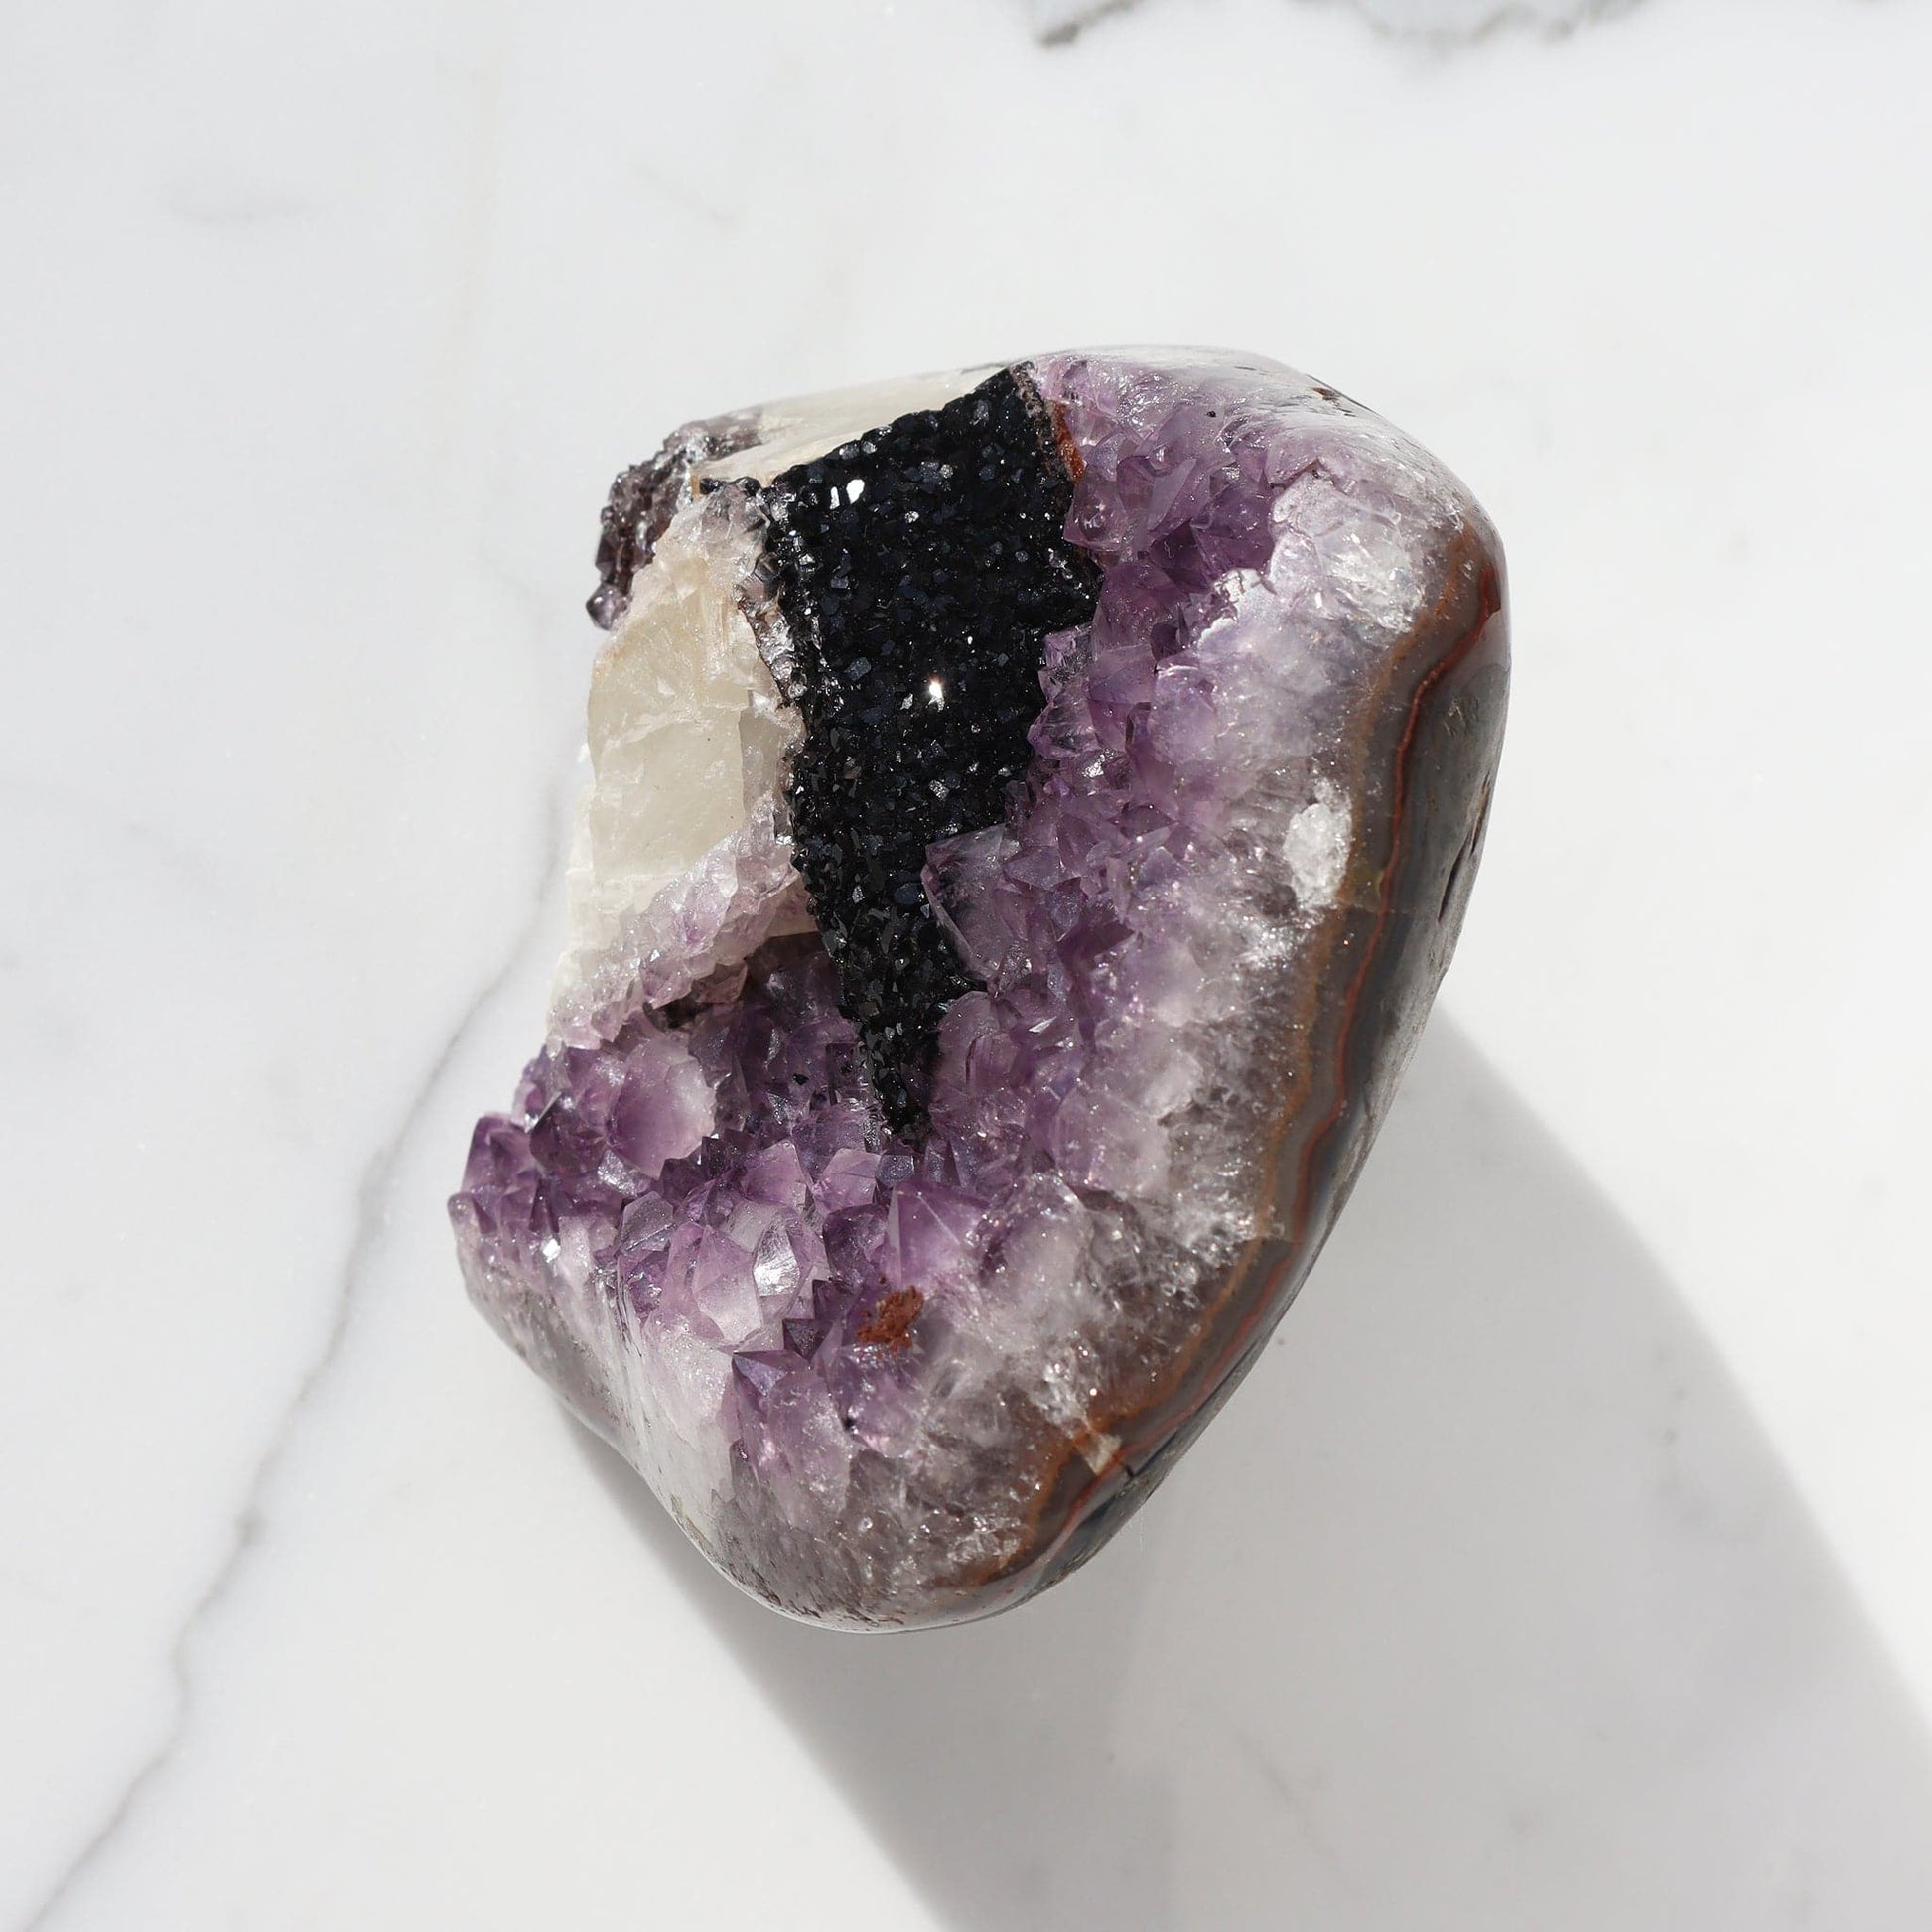 Icy Calcites Rare Amethyst Geode - Deepest Earth